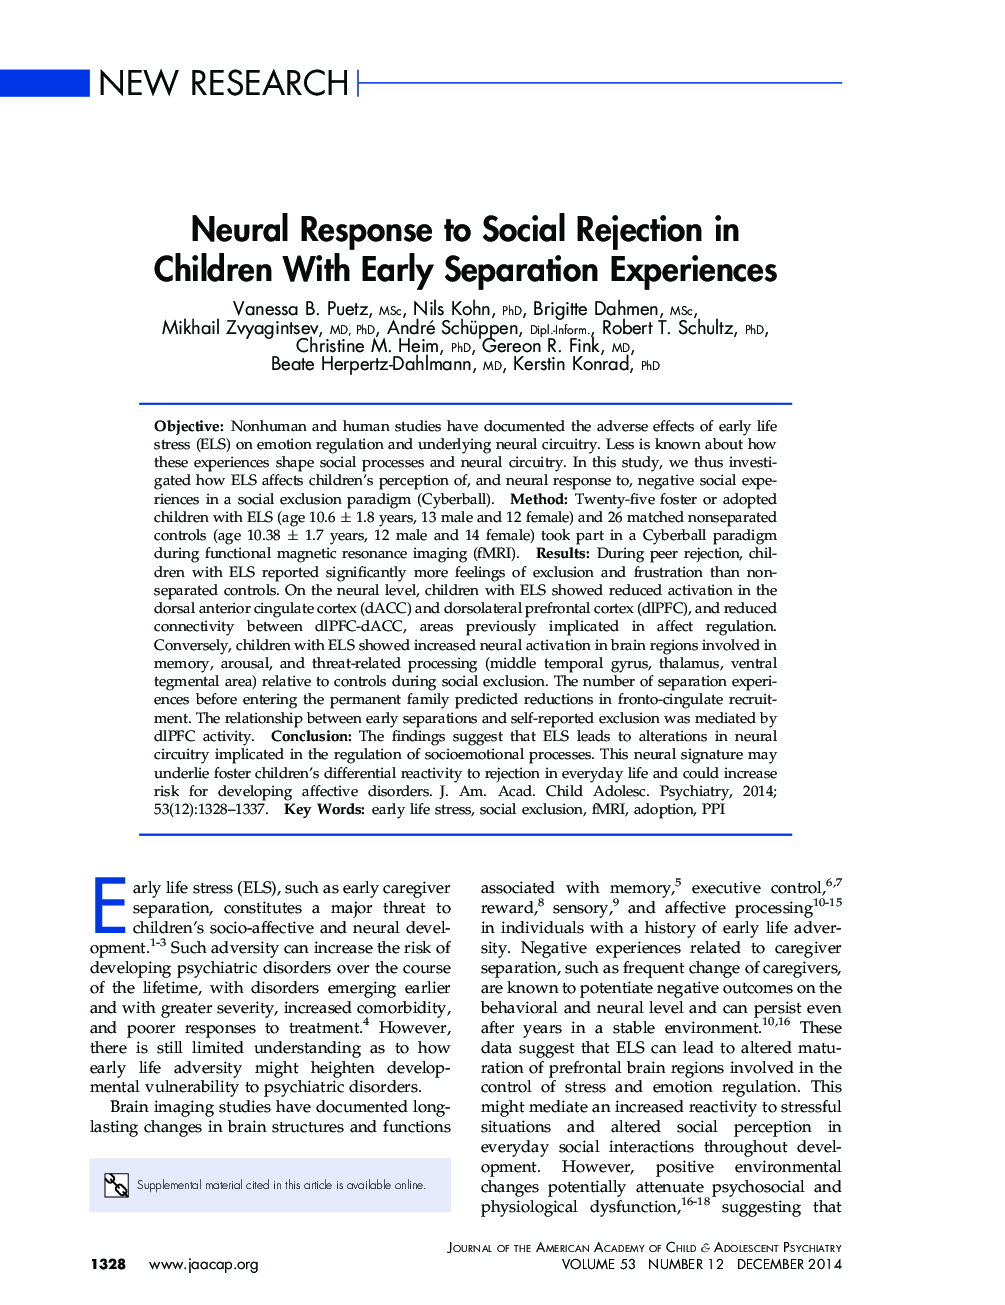 Neural Response to Social Rejection in Children With Early Separation Experiences